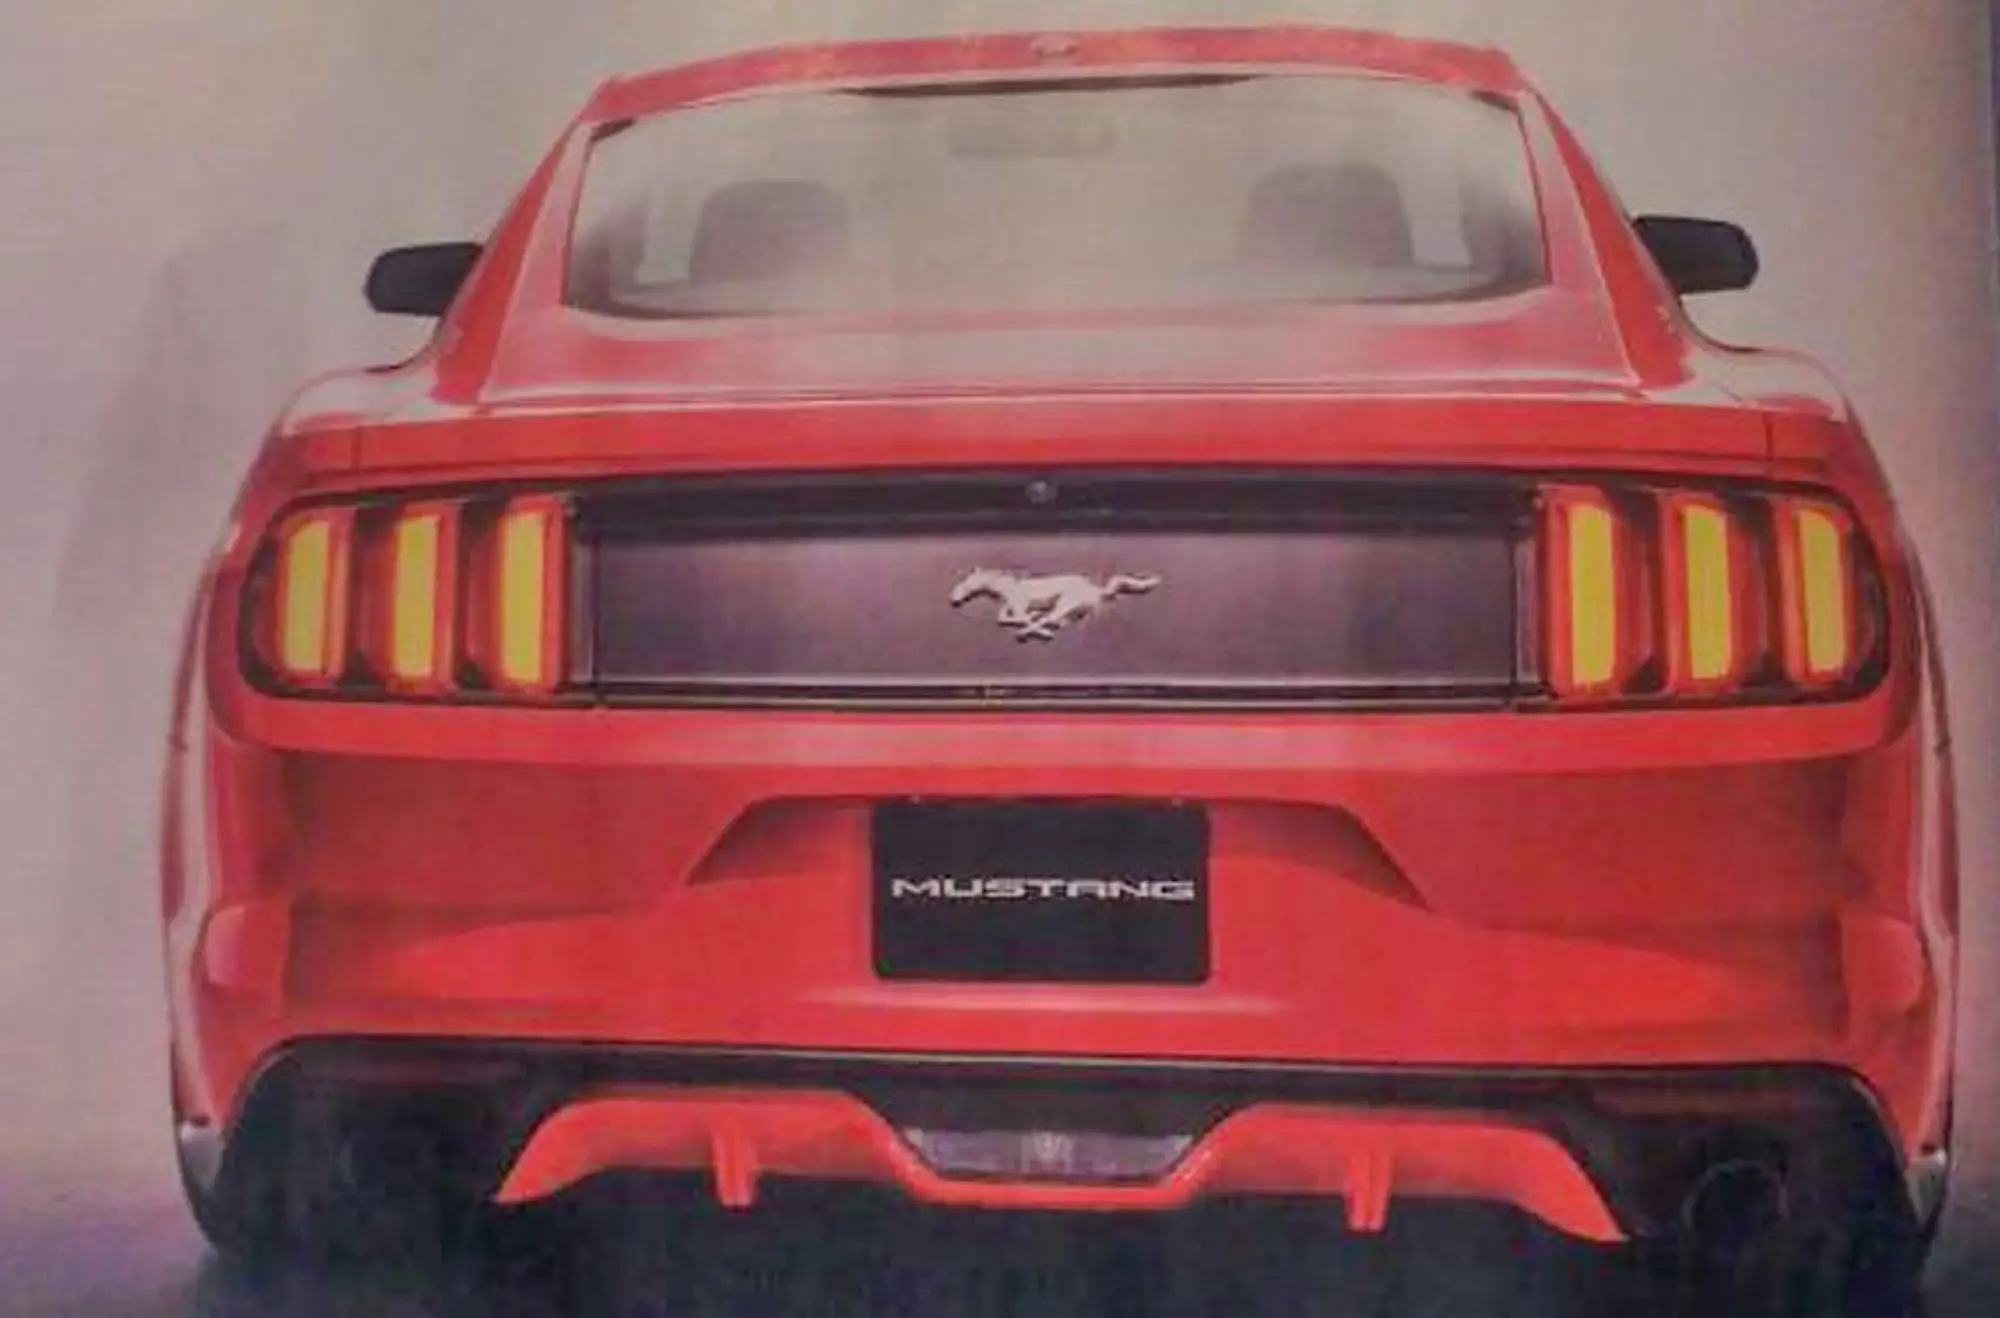 Ford Mustang MY 2015 - Immagini leaked - 3